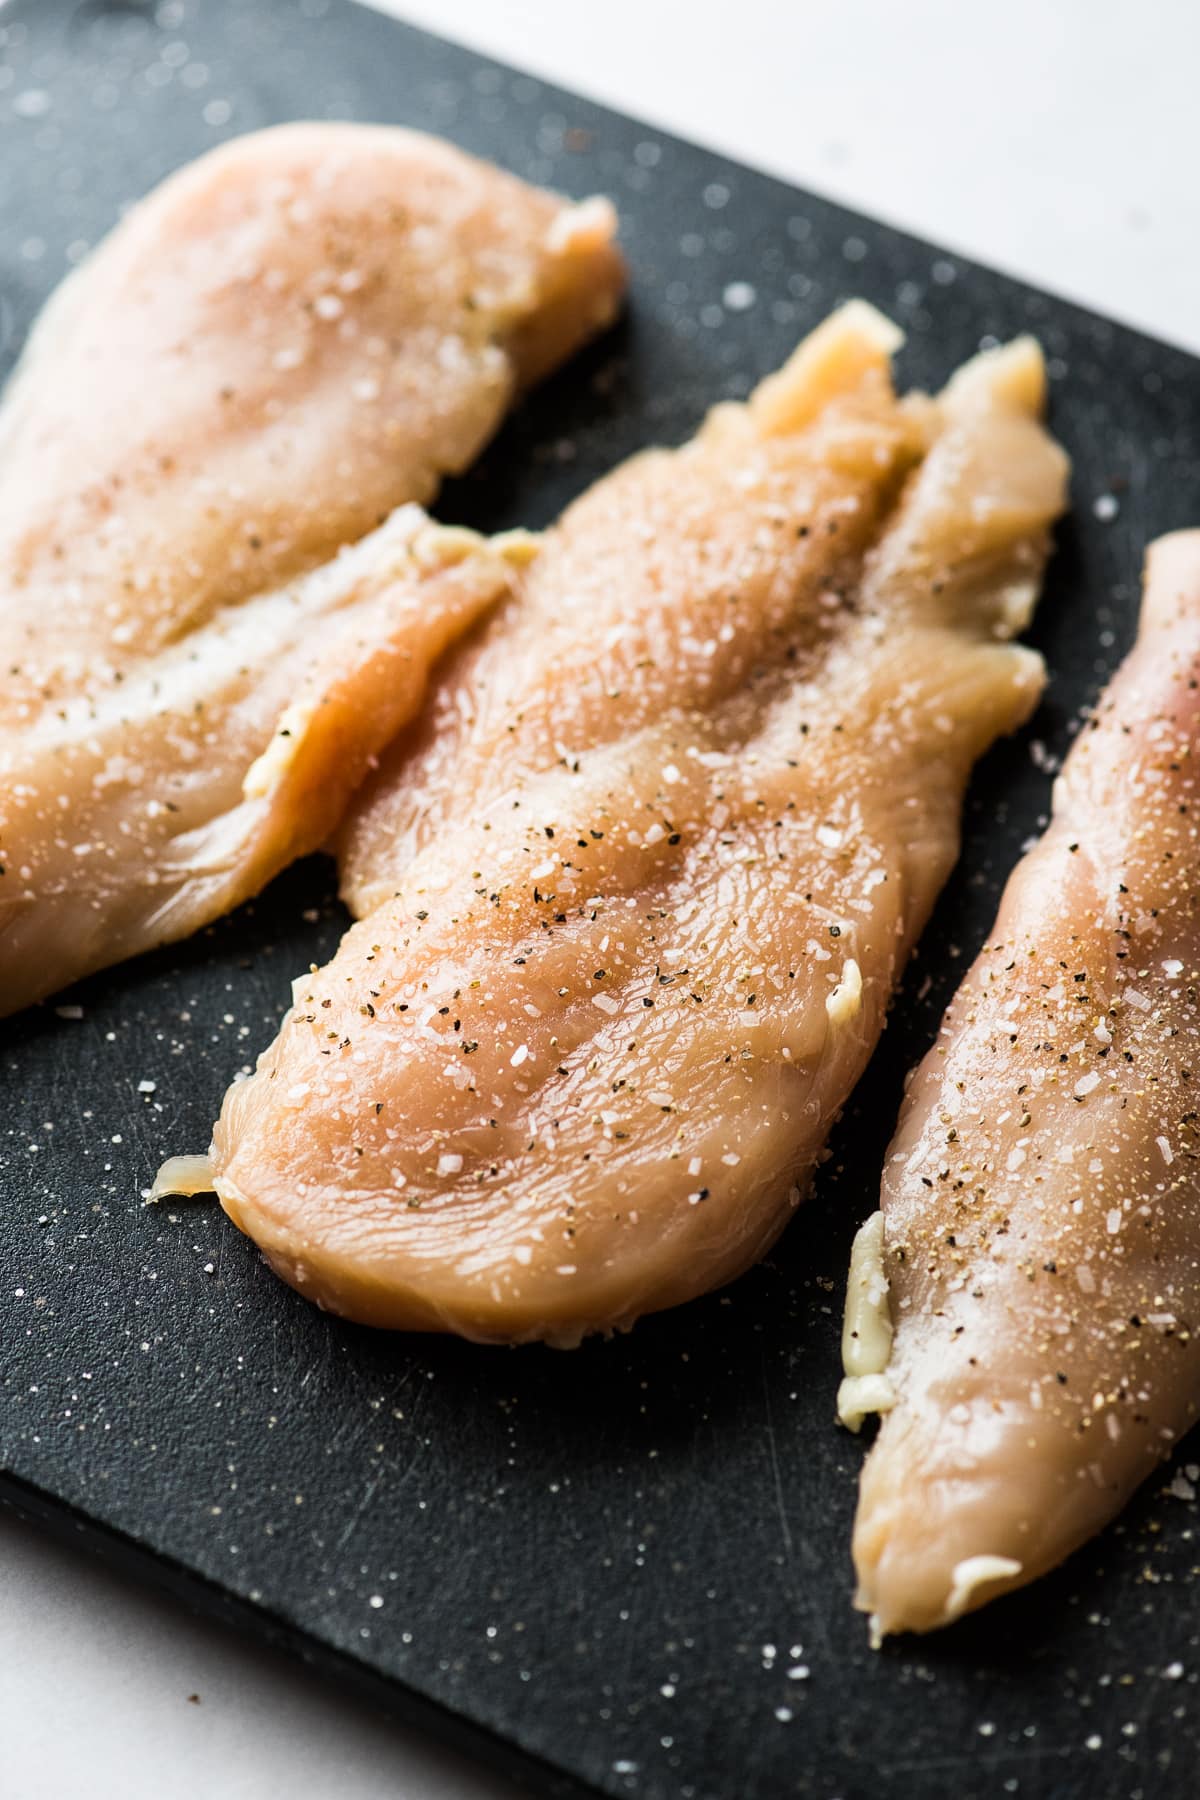 Sliced chicken breast on a cutting board sprinkled with salt and black pepper.